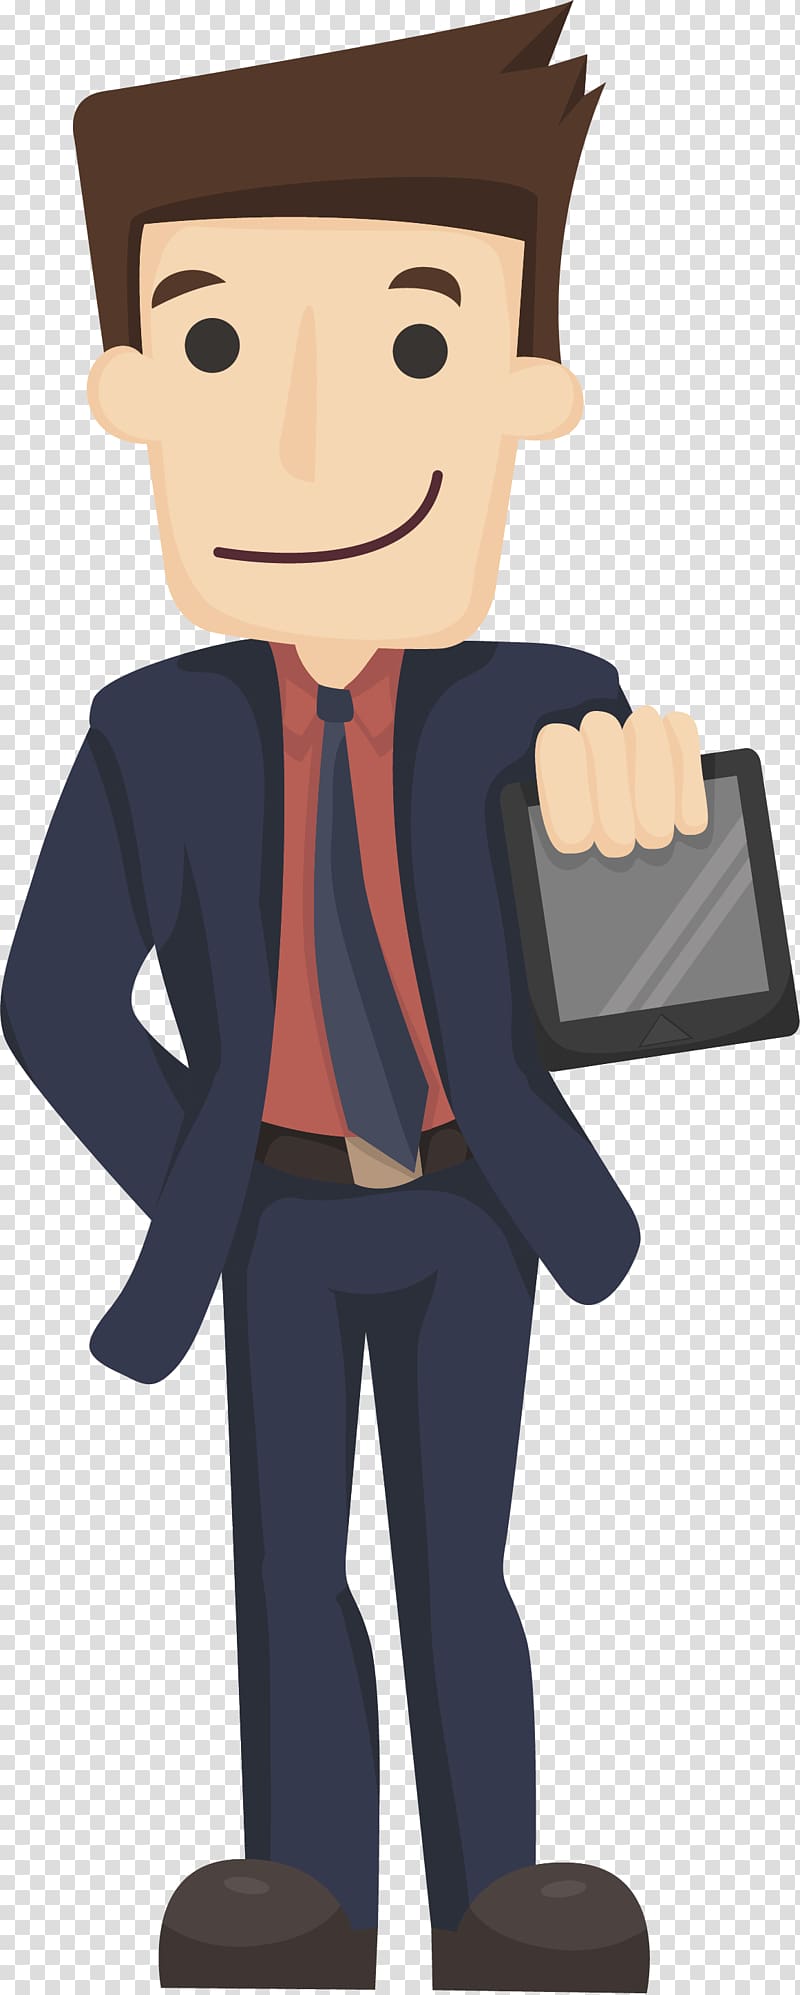 Businessperson Cartoon Illustration, Someone who is using a cell phone transparent background PNG clipart